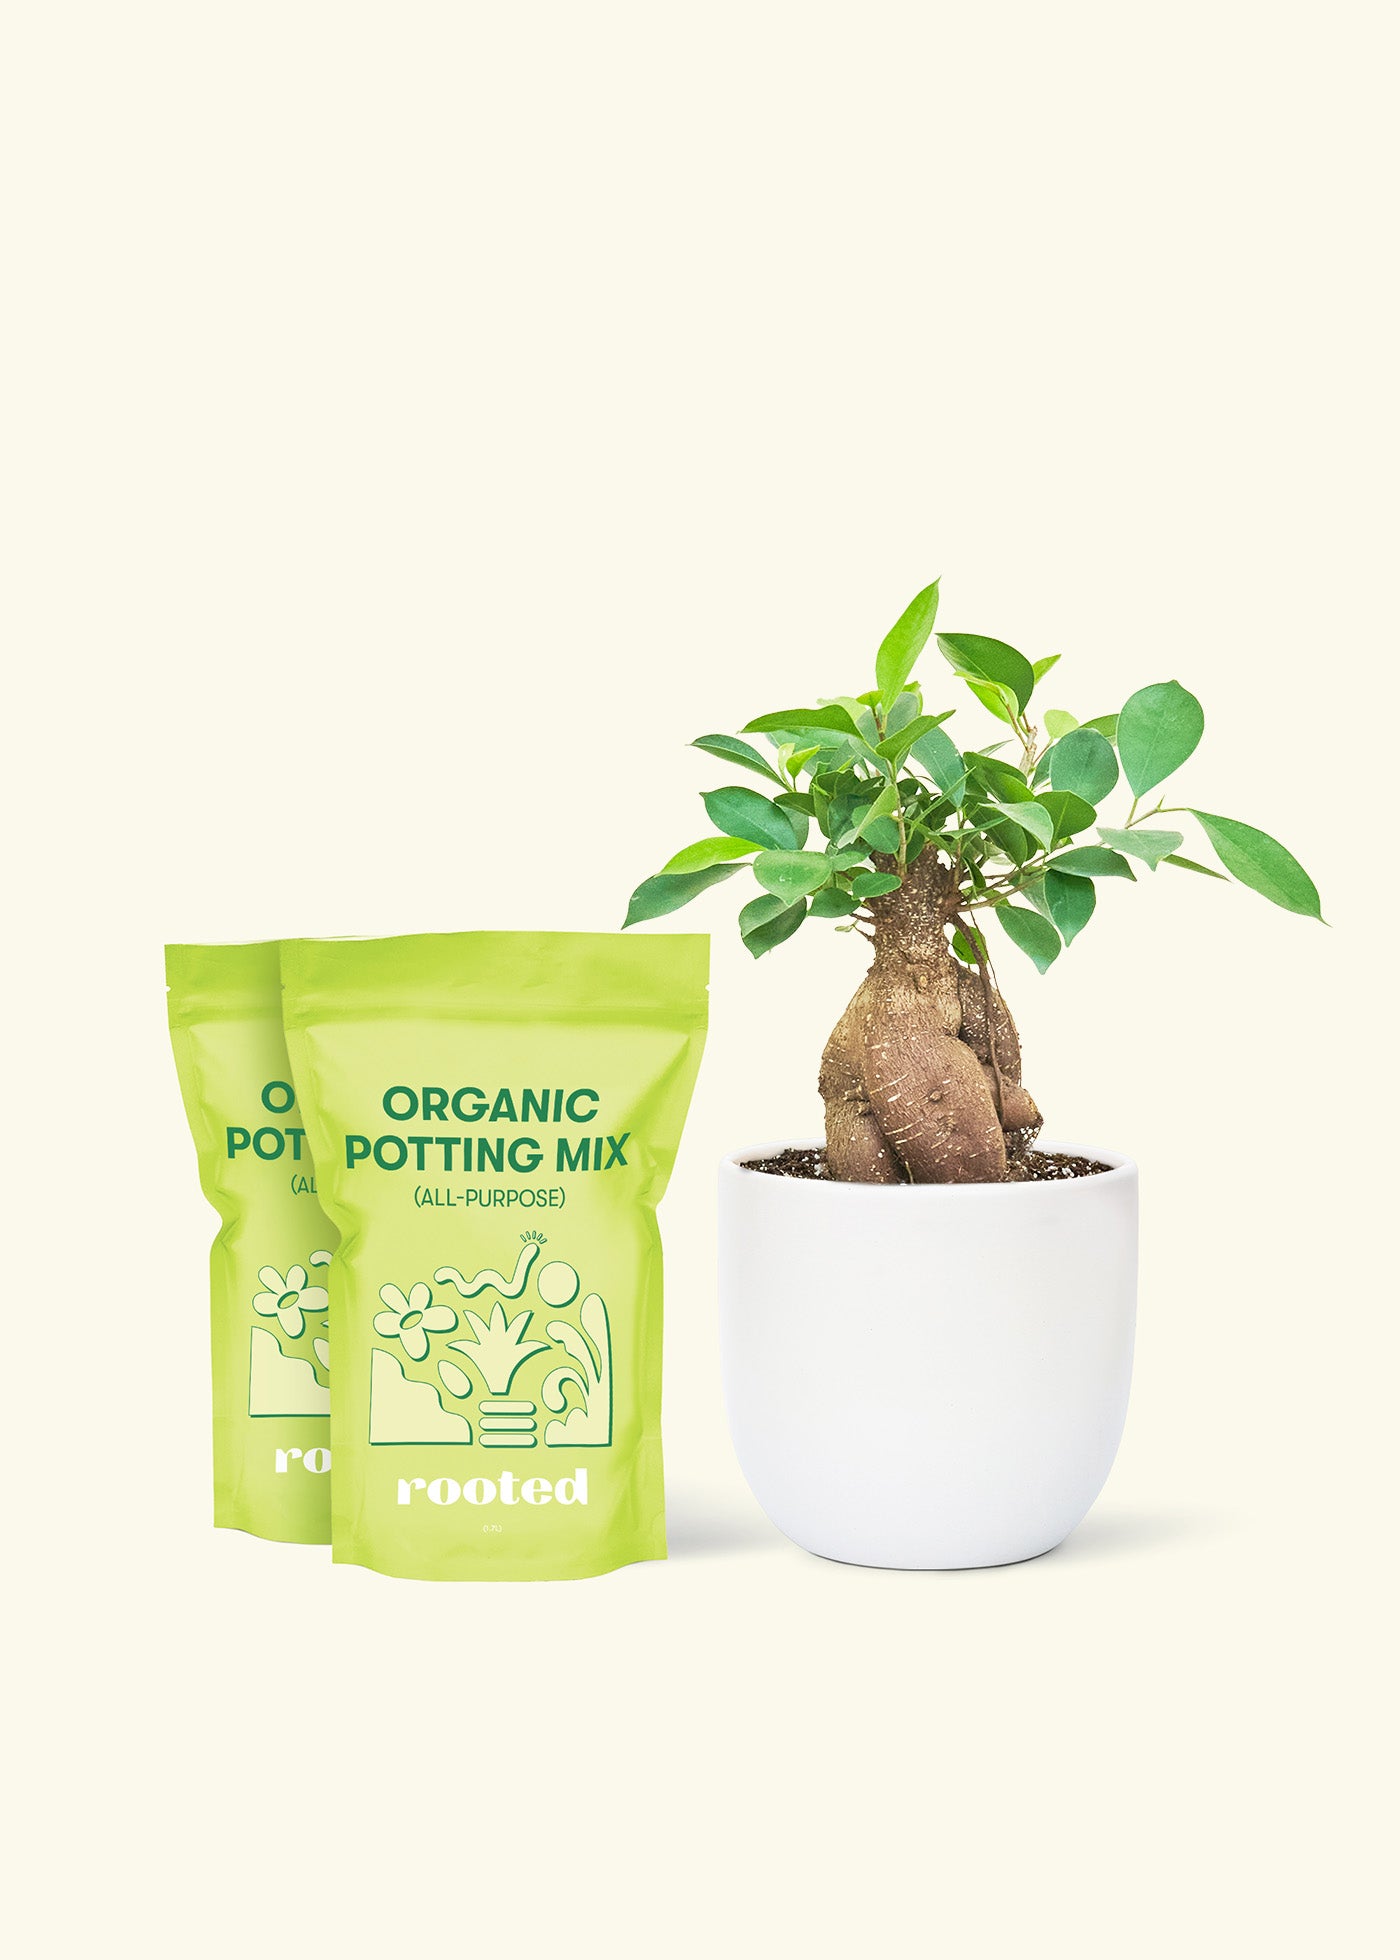 Medium Ficus 'Ginseng' in a white round pot and 2 bags of soil.